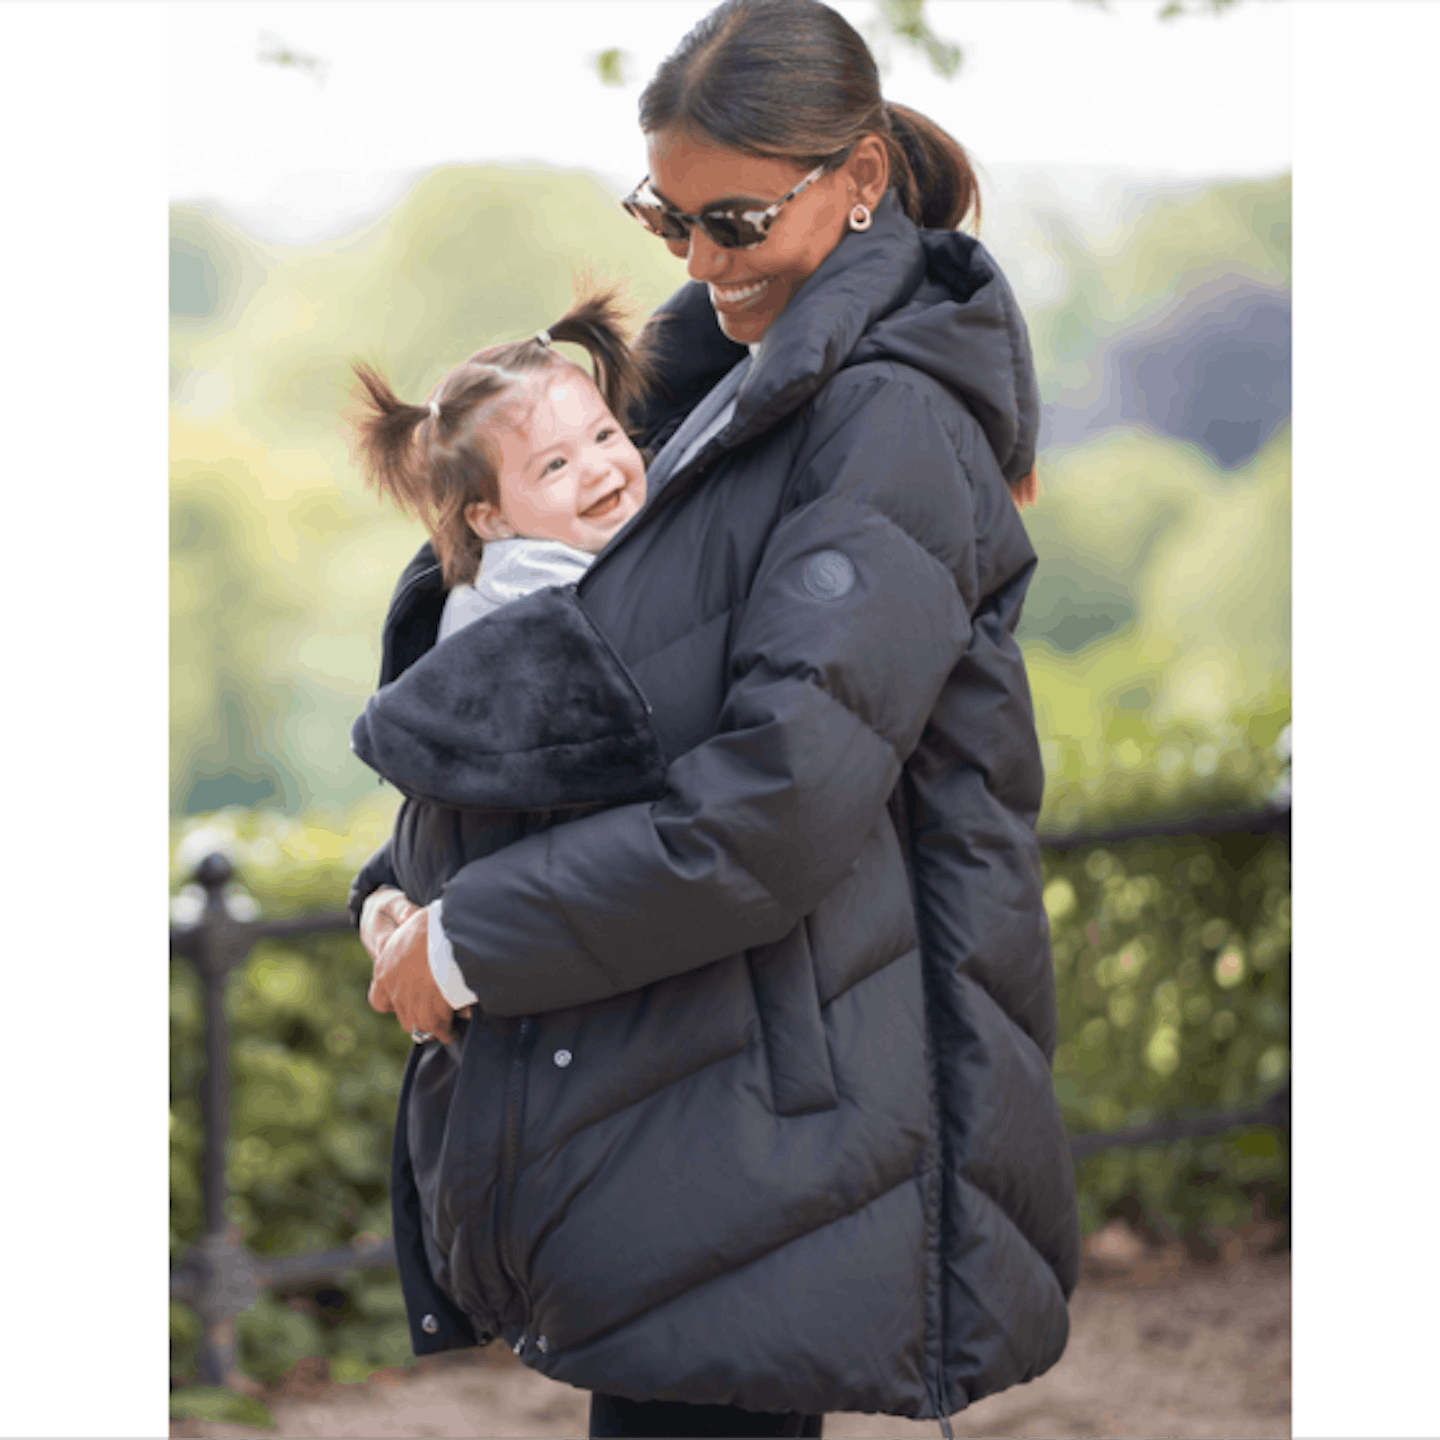 Seraphine Maternity Activewear On Sale Up To 90% Off Retail